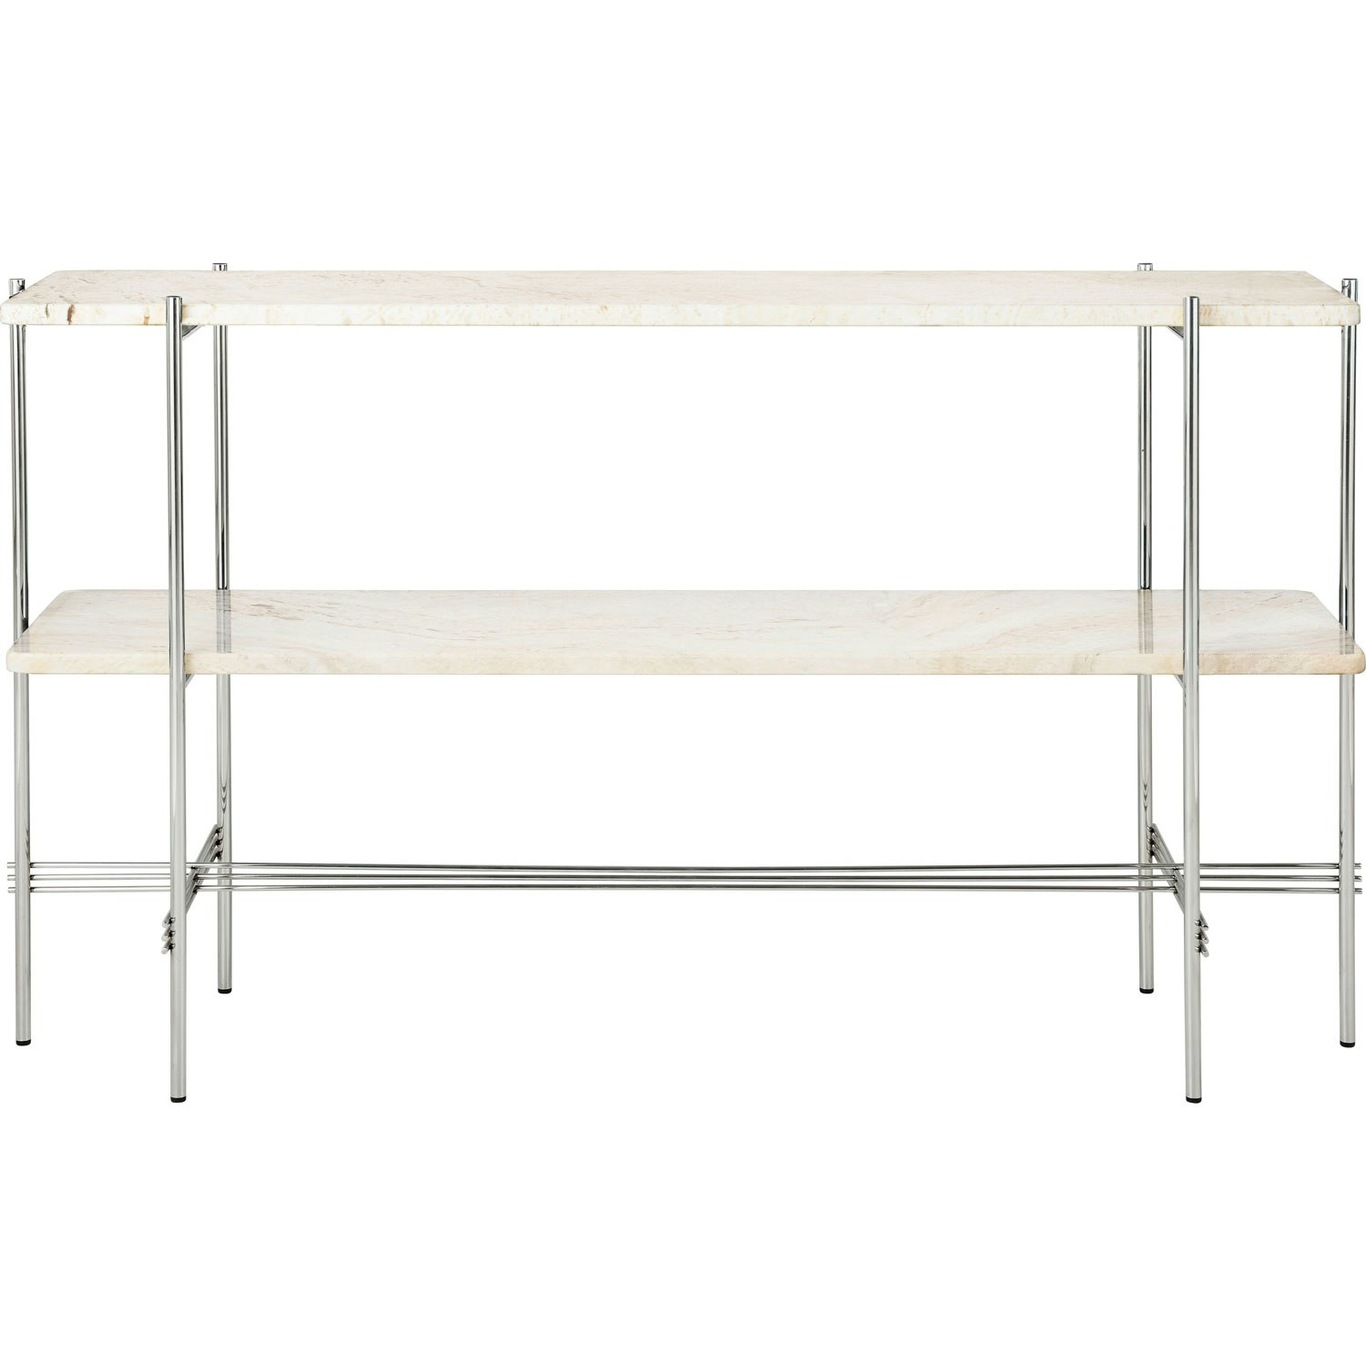 TS Console Side Table 120x30x72 cm, Polished Steel / Neutral white Travertine